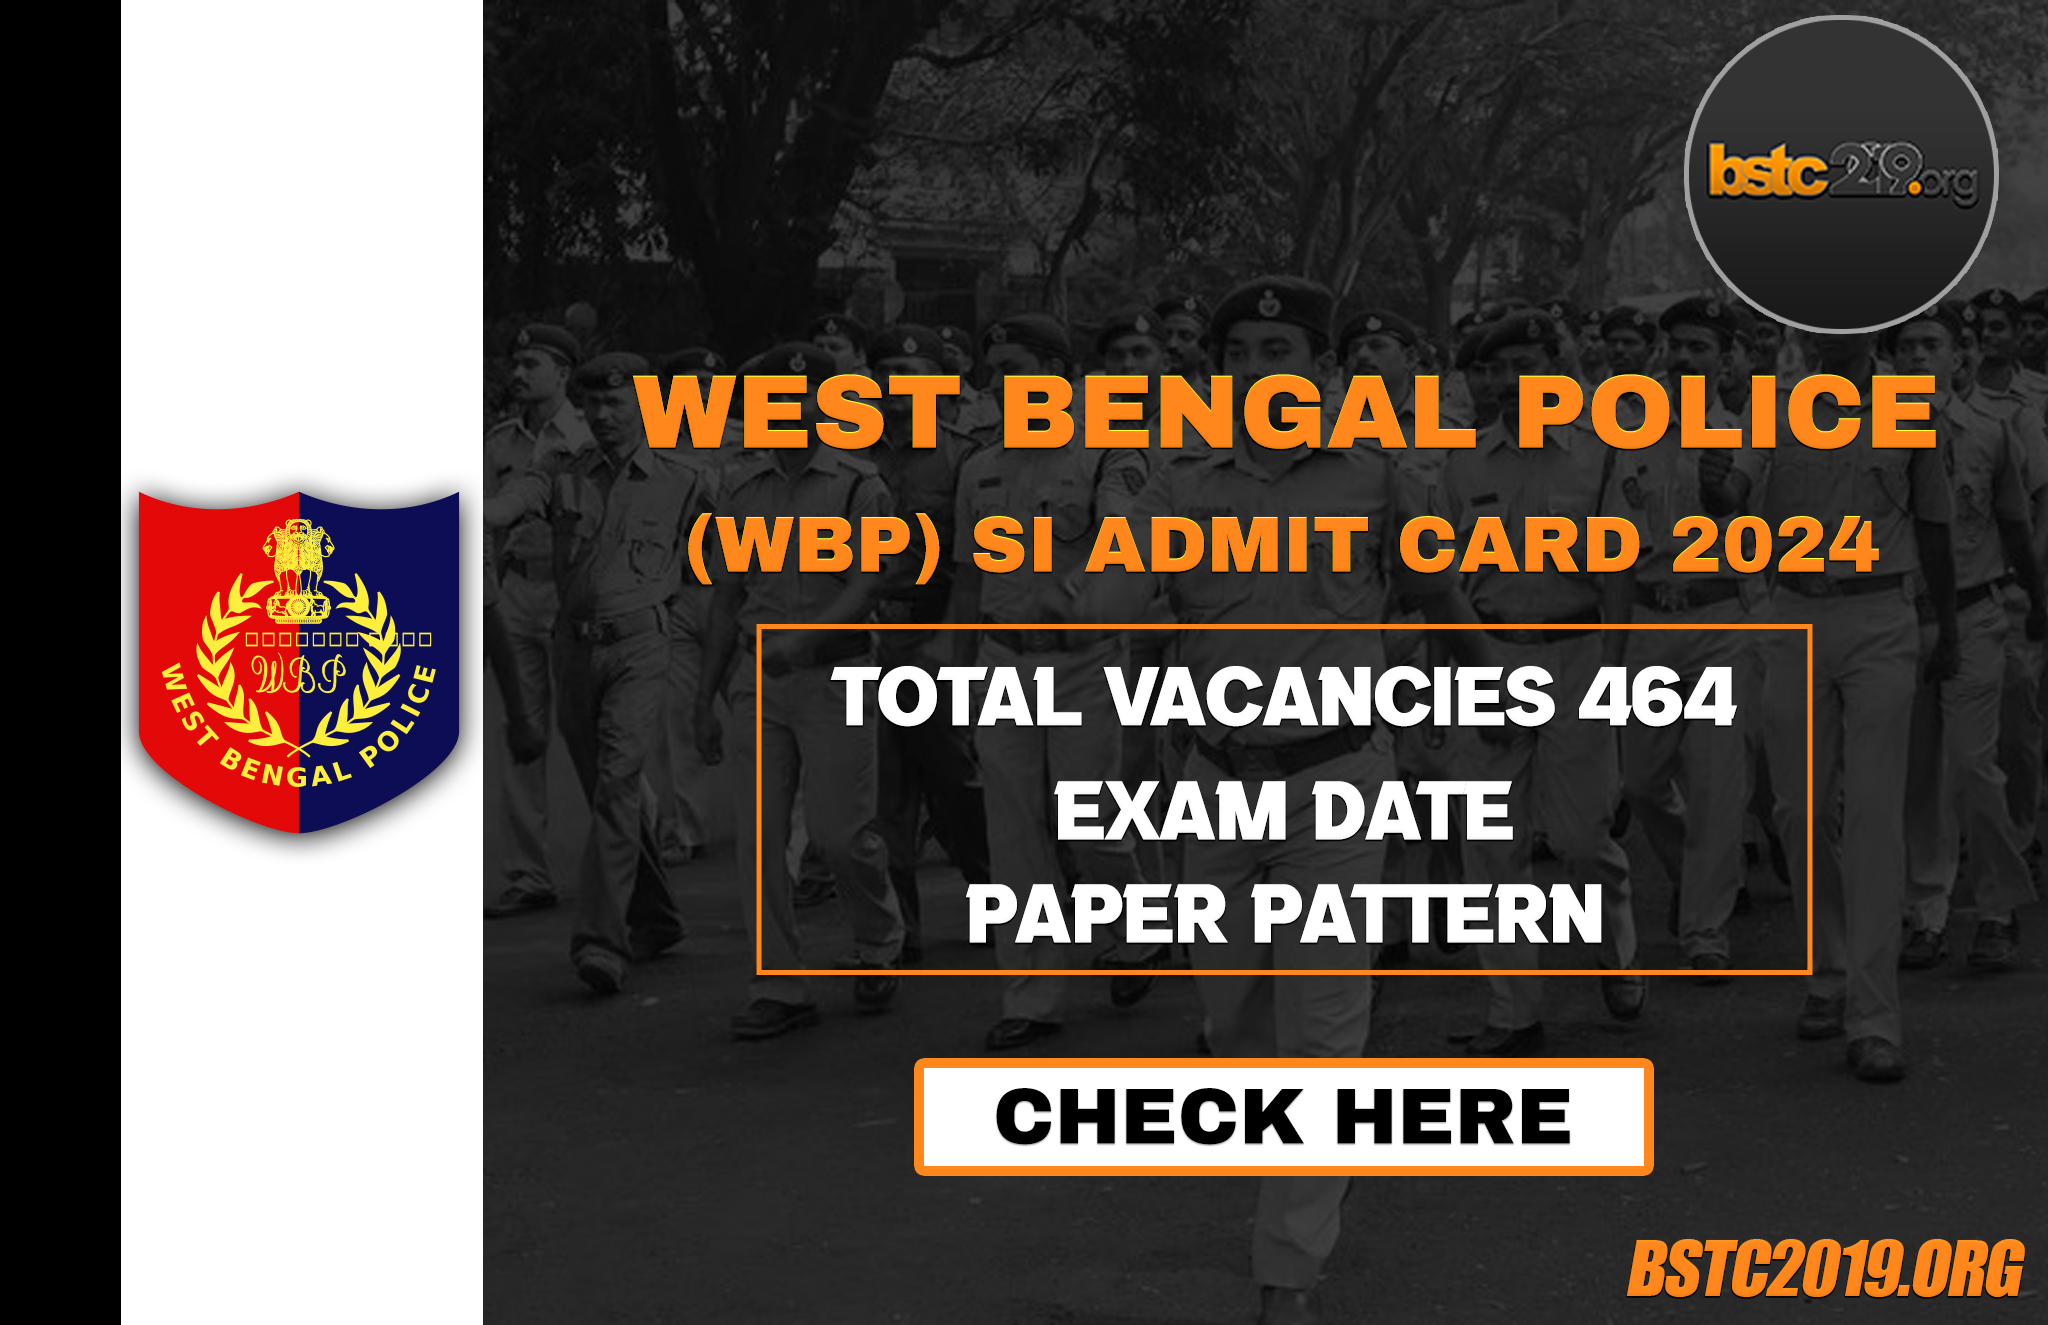 West Bengal police (WBP) SI Admit card 2024